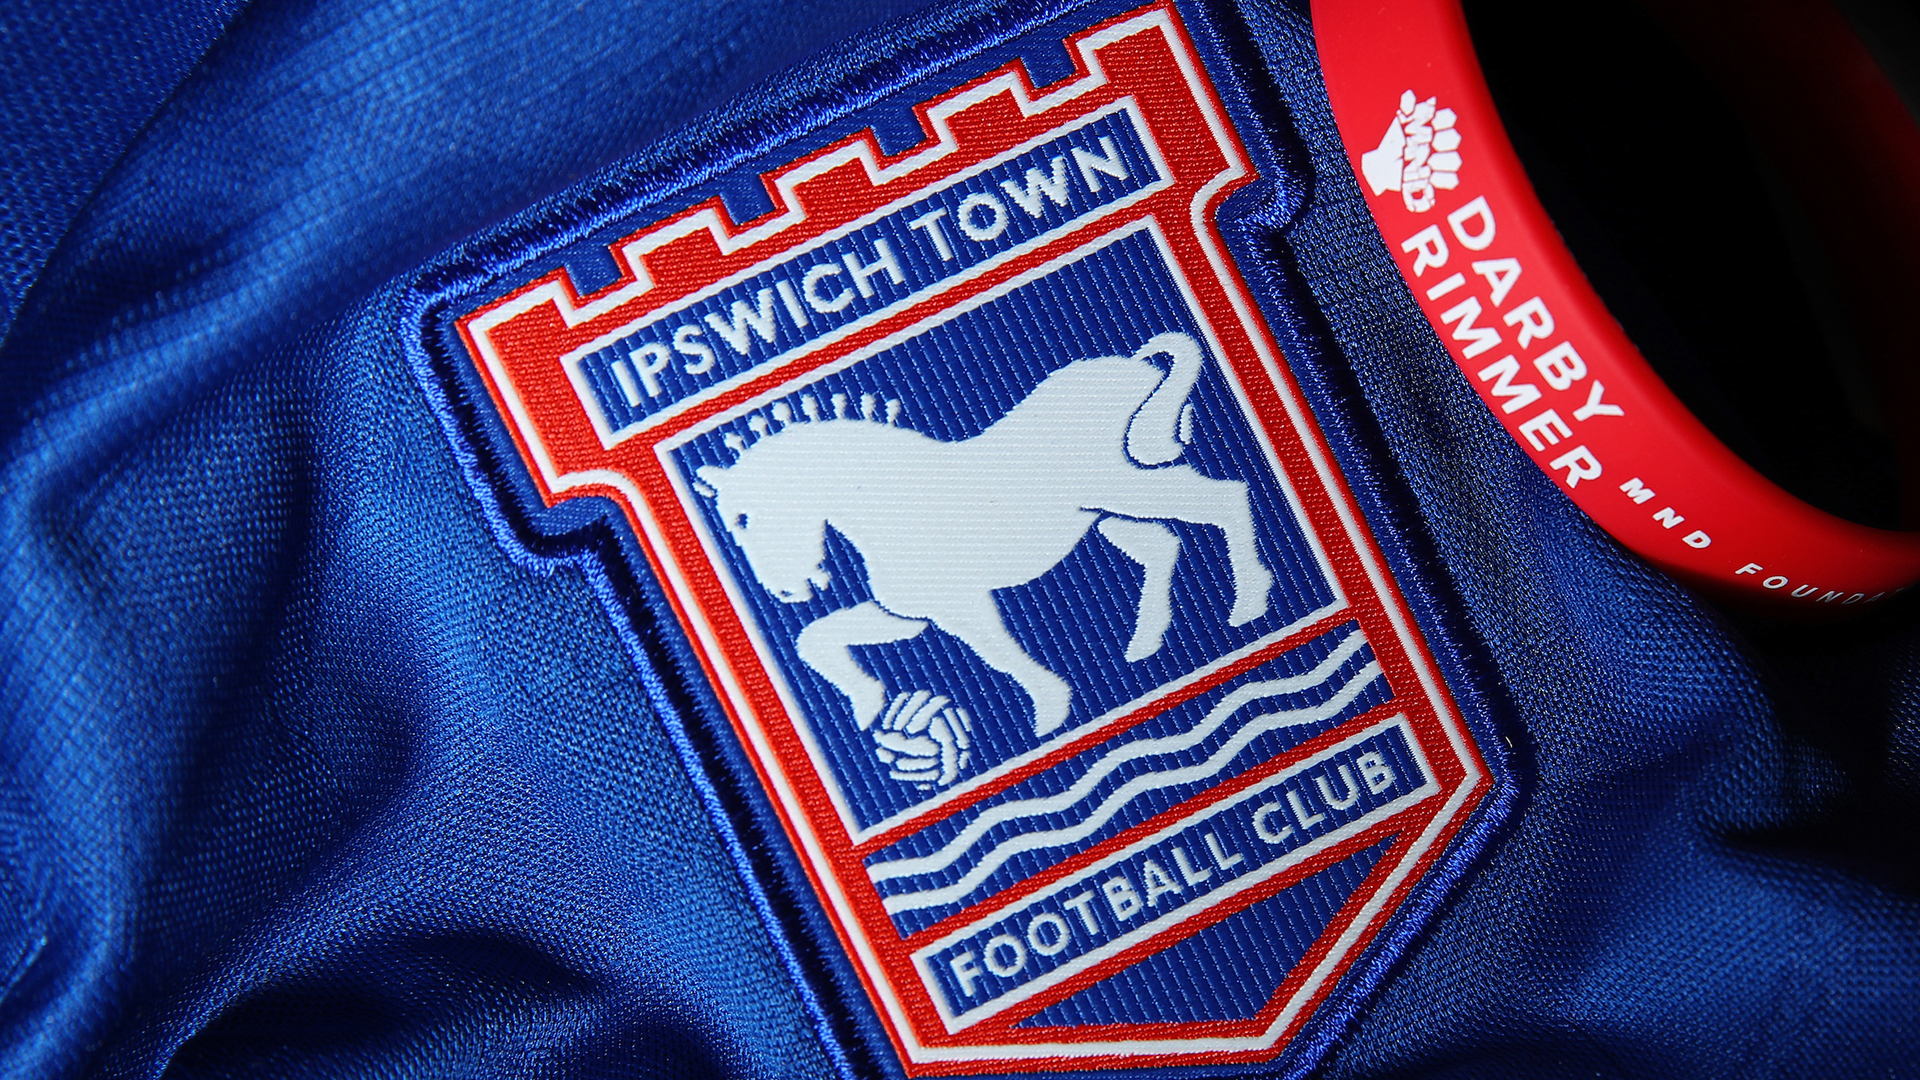 Skysport Analyst reviews Ipswich next game against a struggling side…